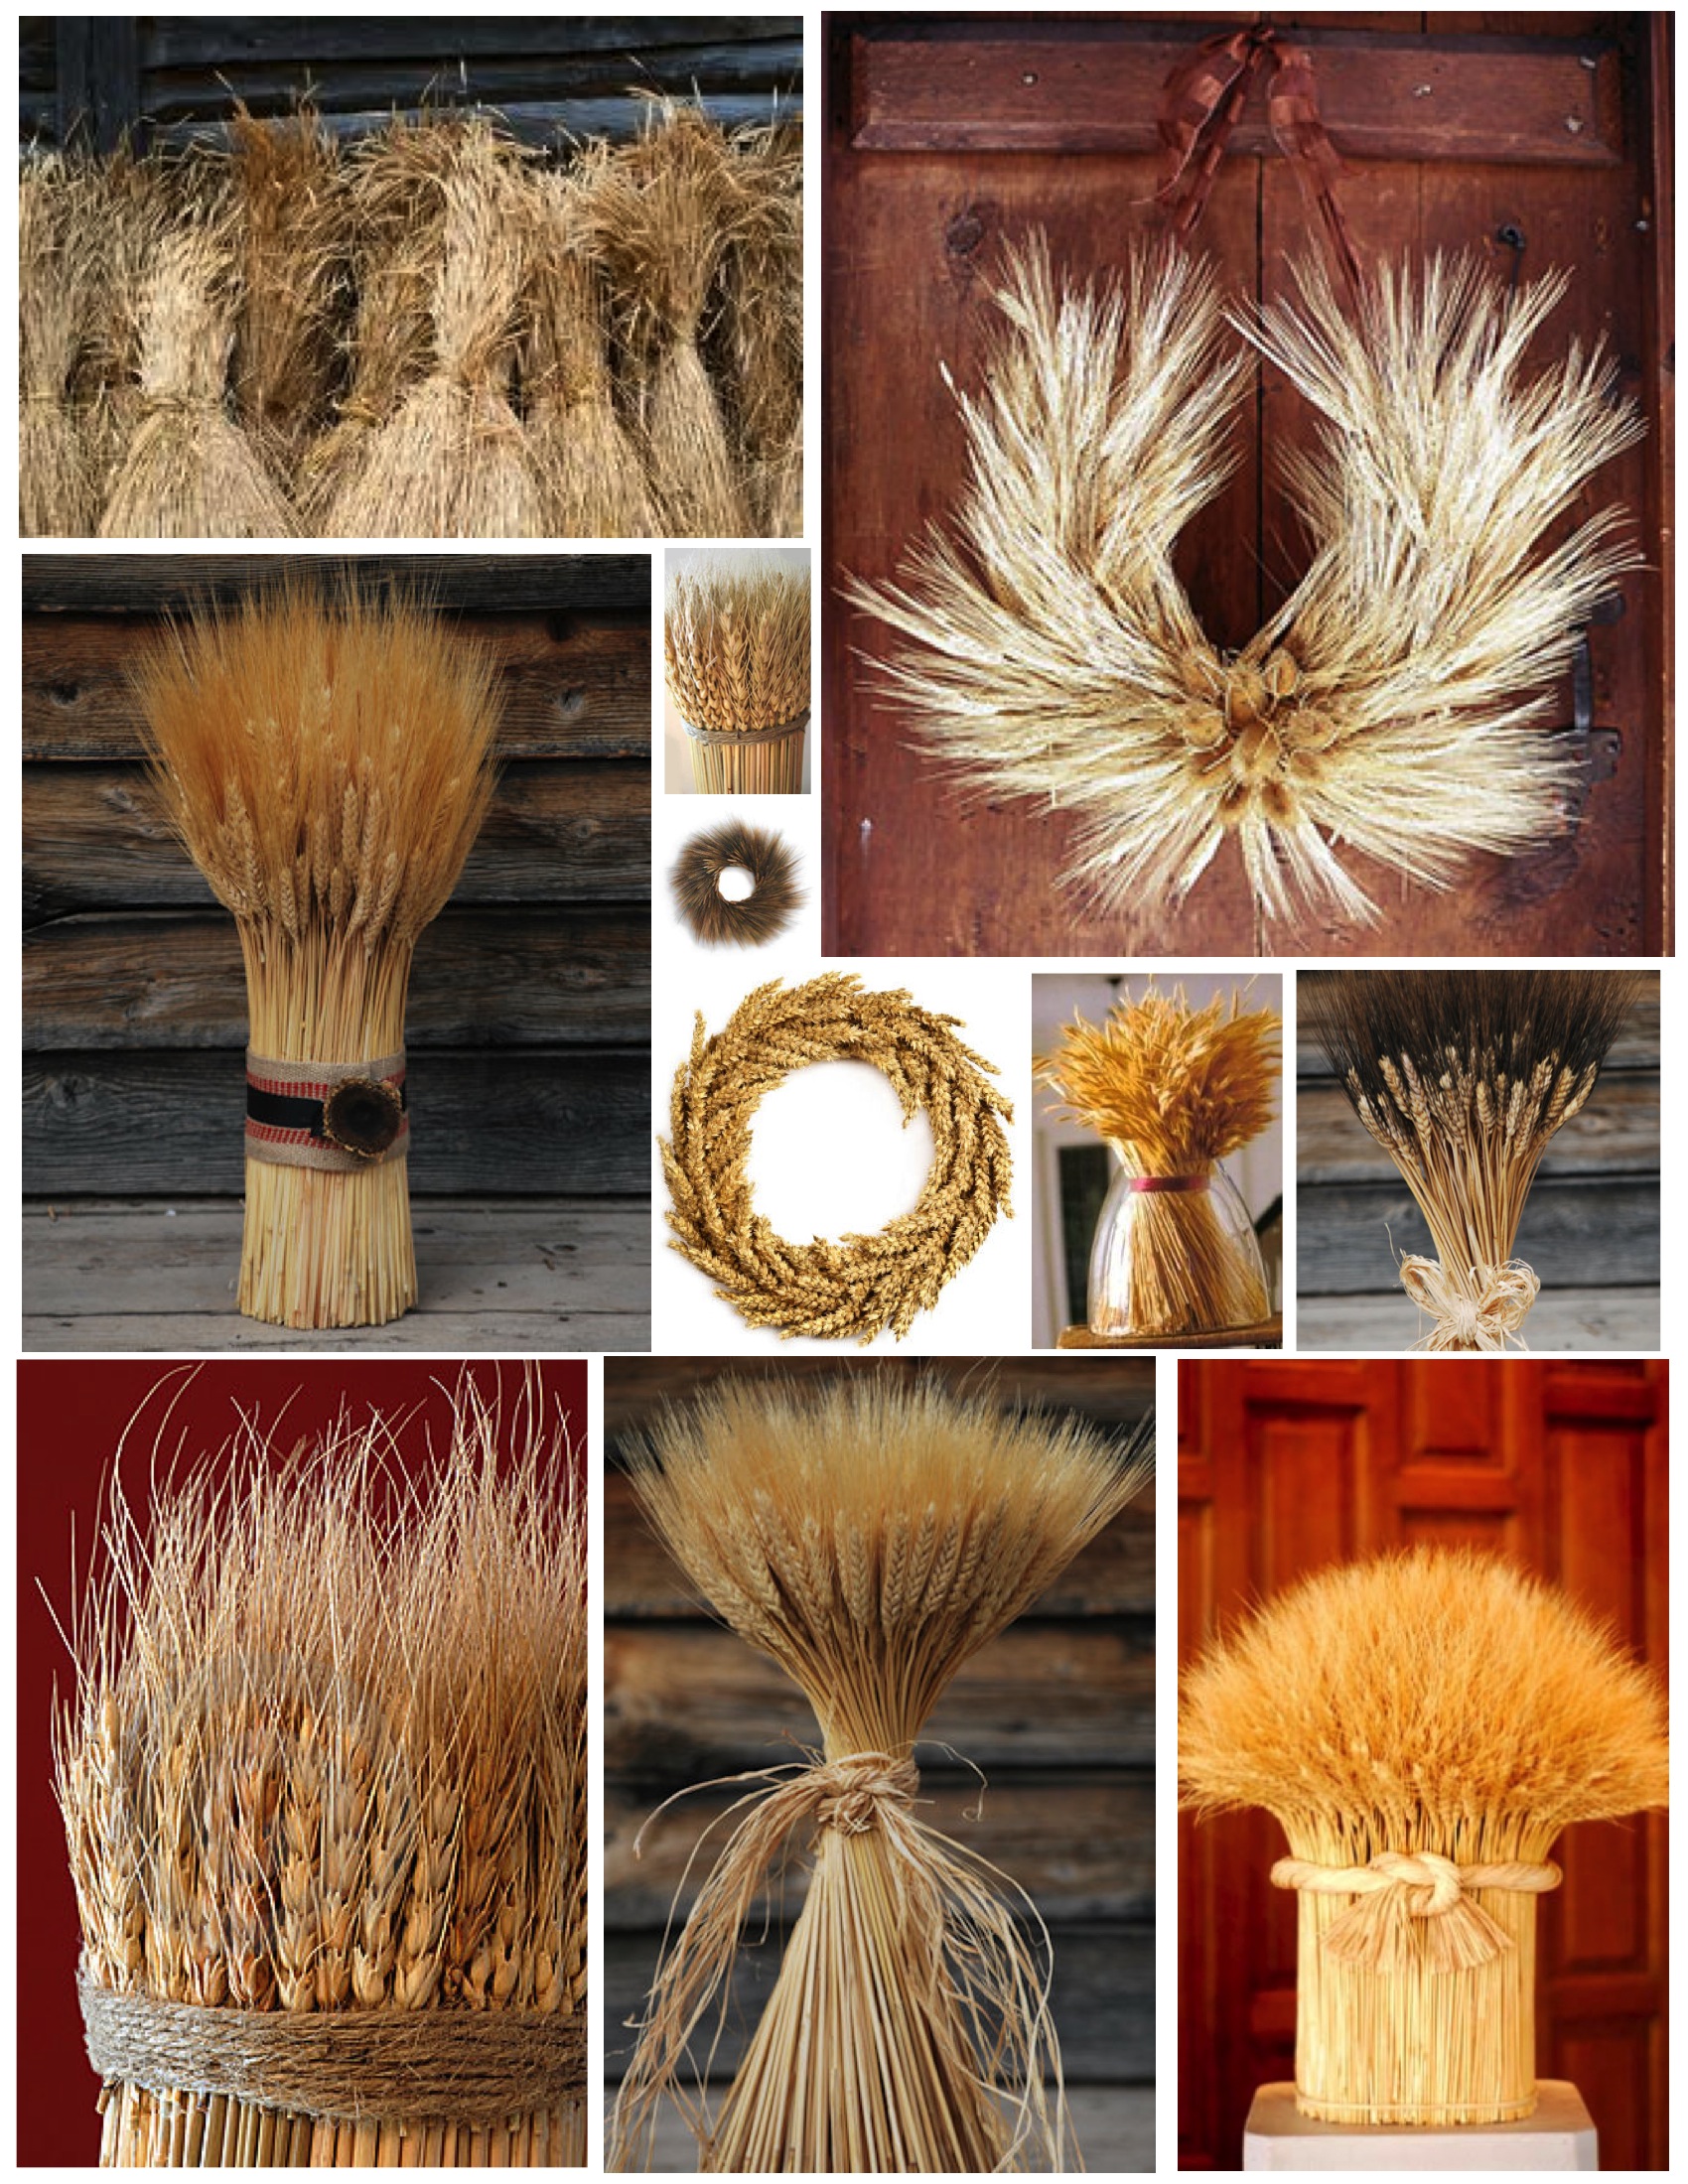 The Natural Appeal Of Interior Appeal Bounty Within | Of Wheat: Style The A House